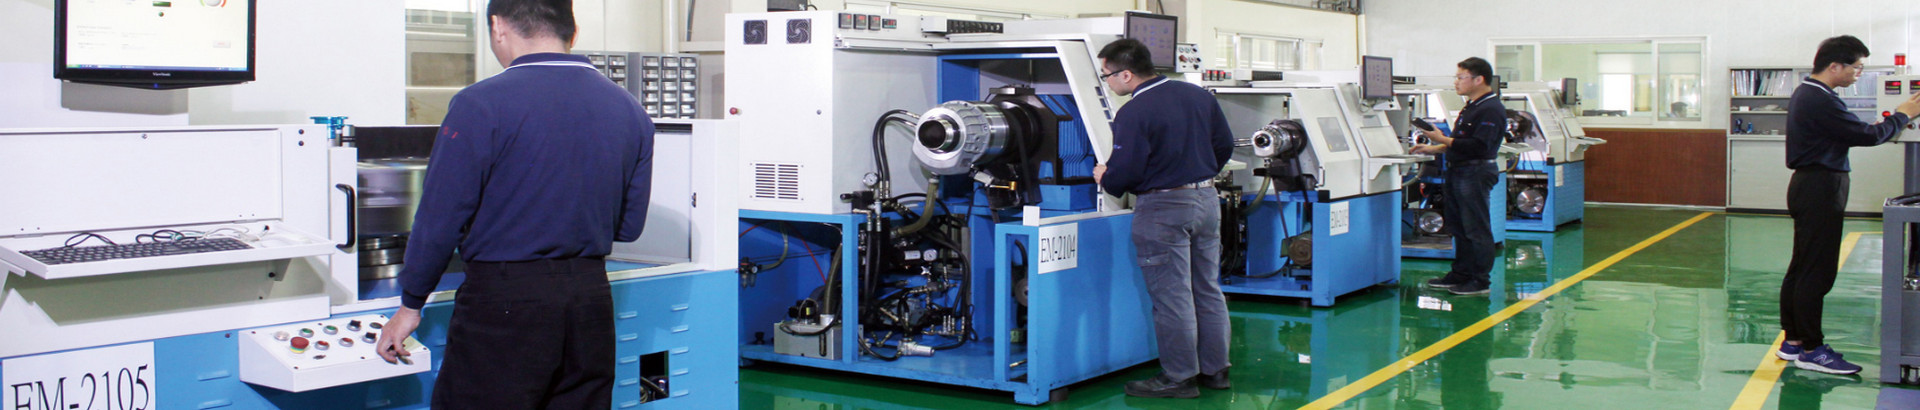 Autogrip Machinery Co., Ltd.: Advancing Precision and Efficiency in Machine Chucks and Rotary Cylinders